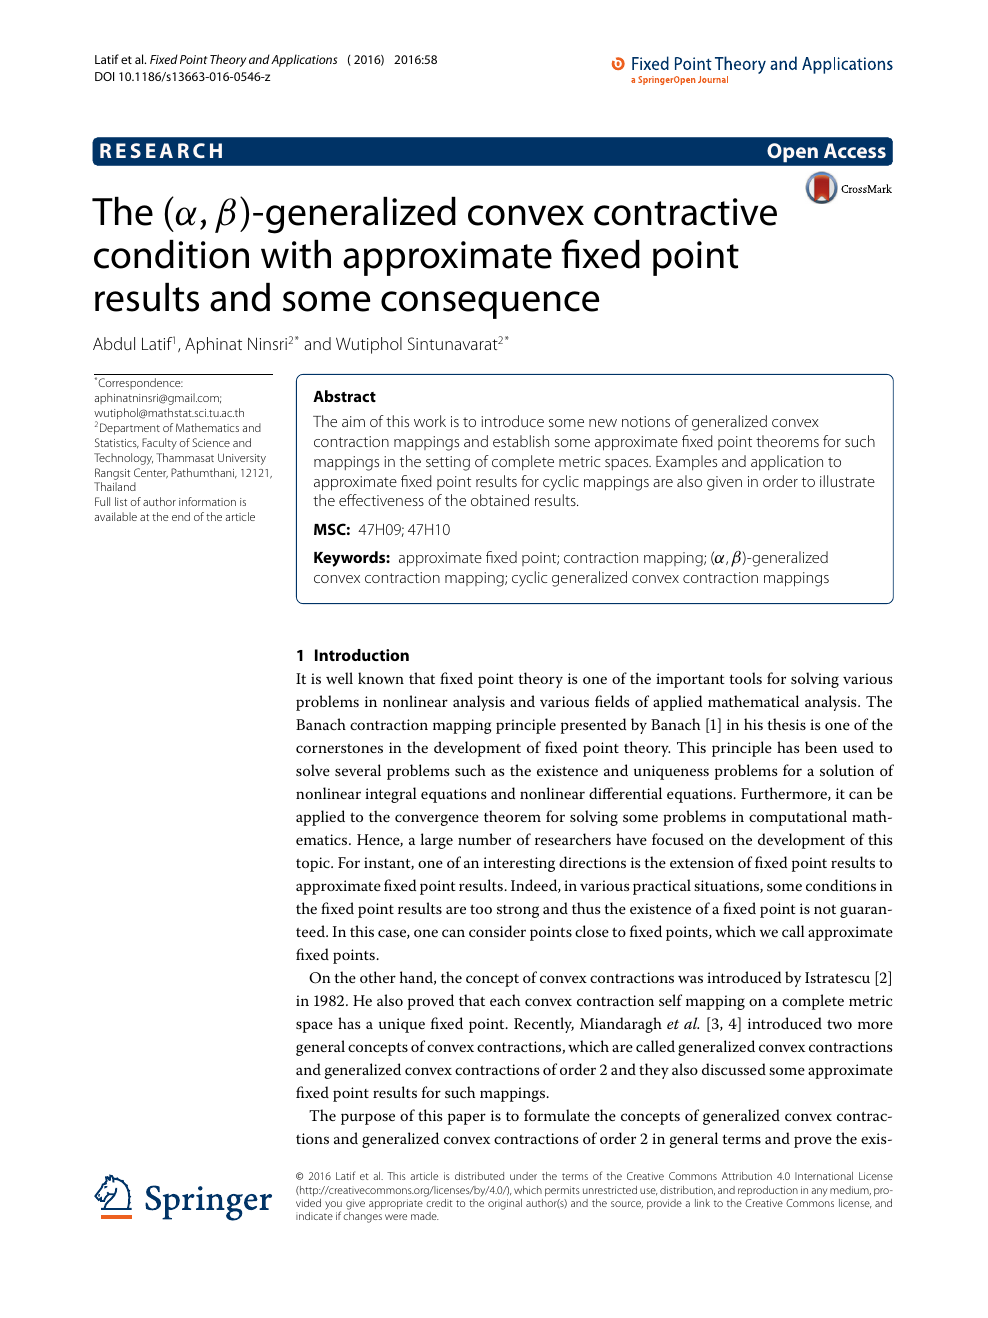 The A B Alpha Beta Generalized Convex Contractive Condition With Approximate Fixed Point Results And Some Consequence Topic Of Research Paper In Mathematics Download Scholarly Article Pdf And